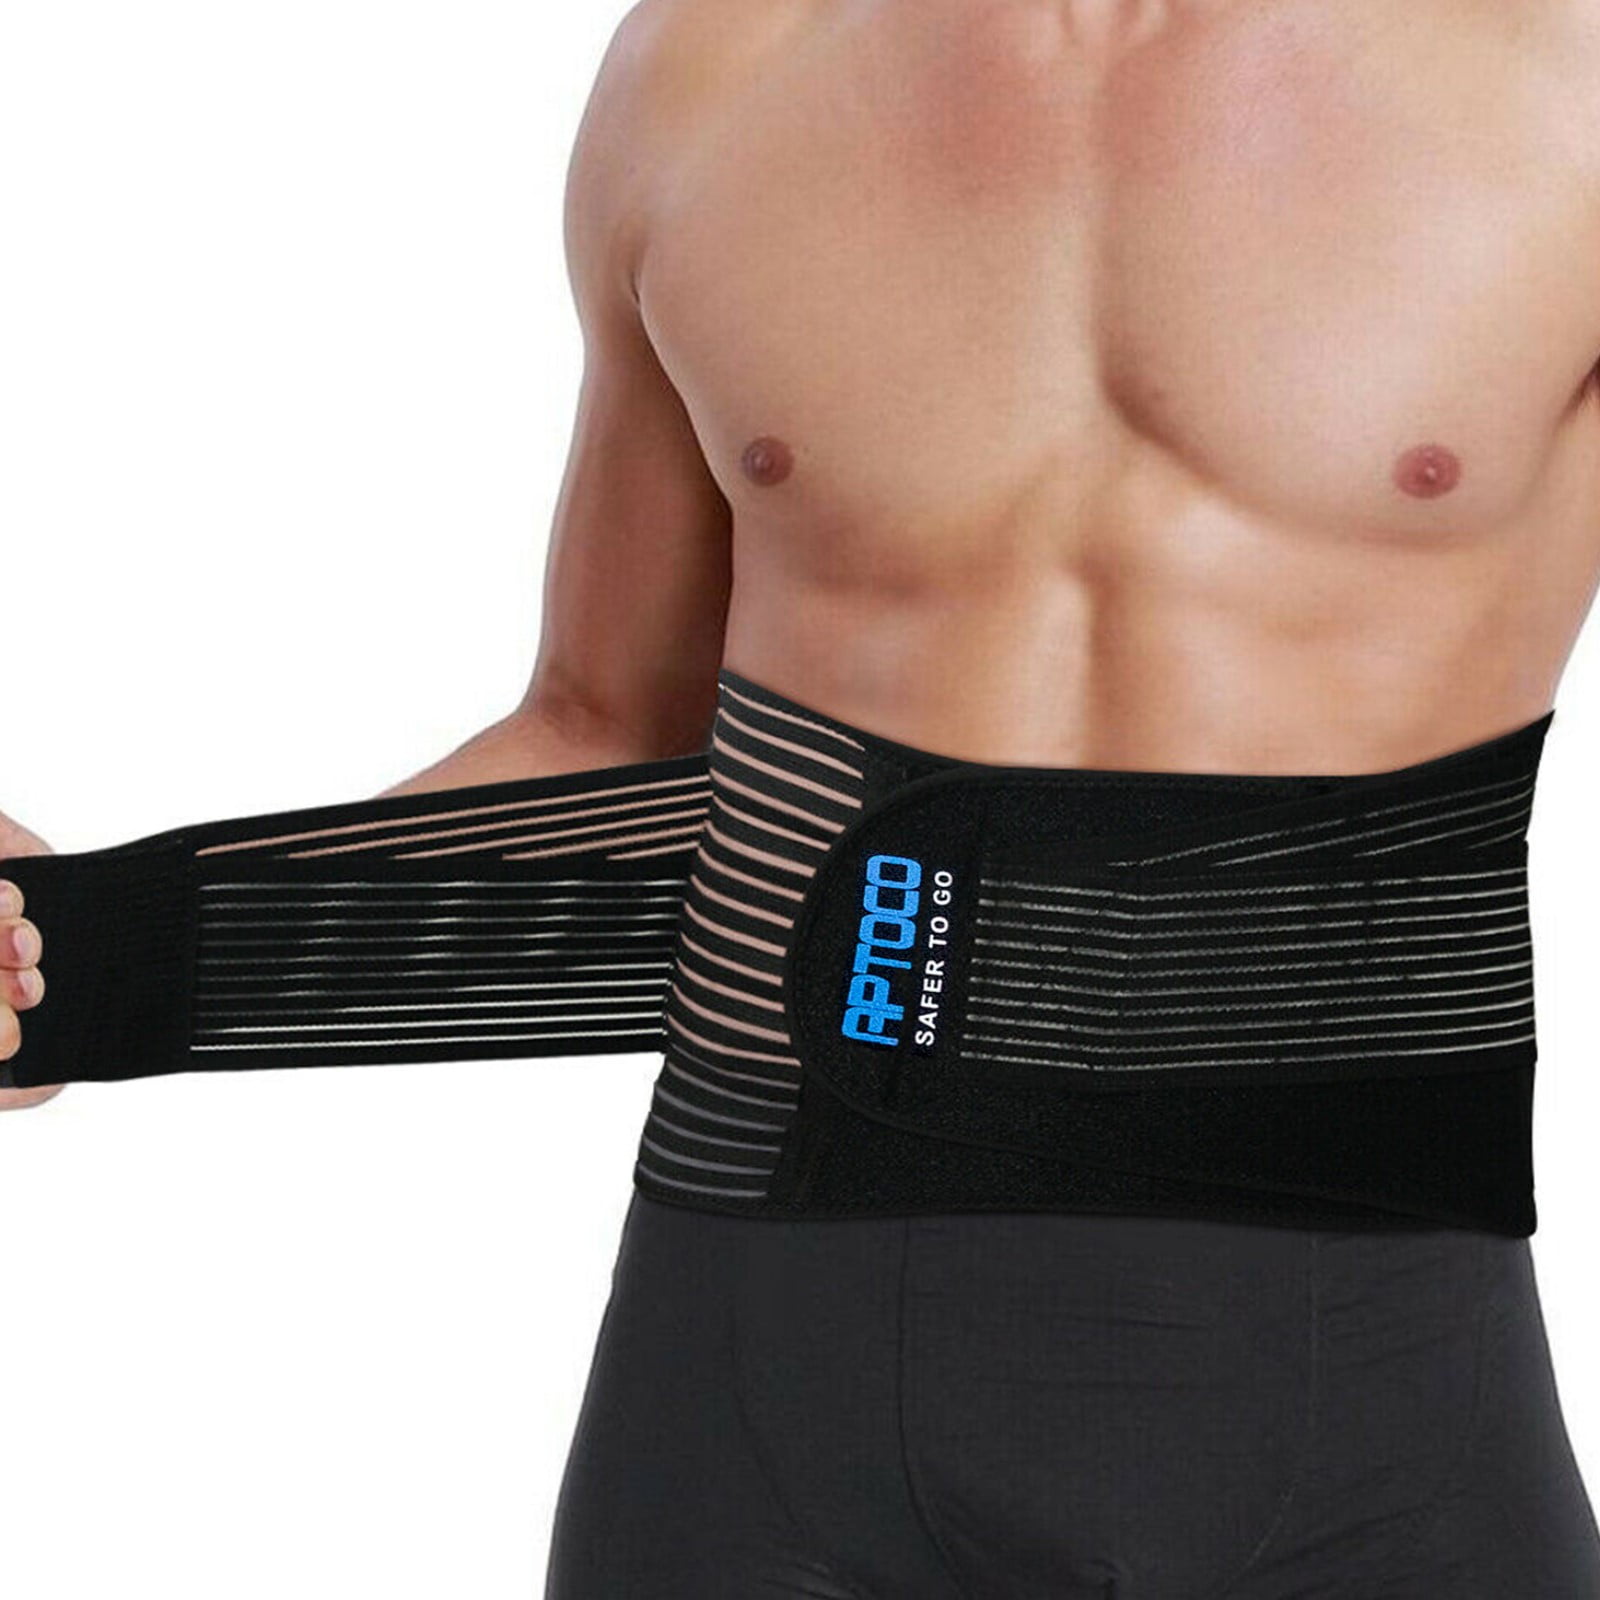 Wellco Back Brace Lumbar Support Shoulder Posture Corrector For Women/Men  Back Pain Relief BABPSCO - The Home Depot